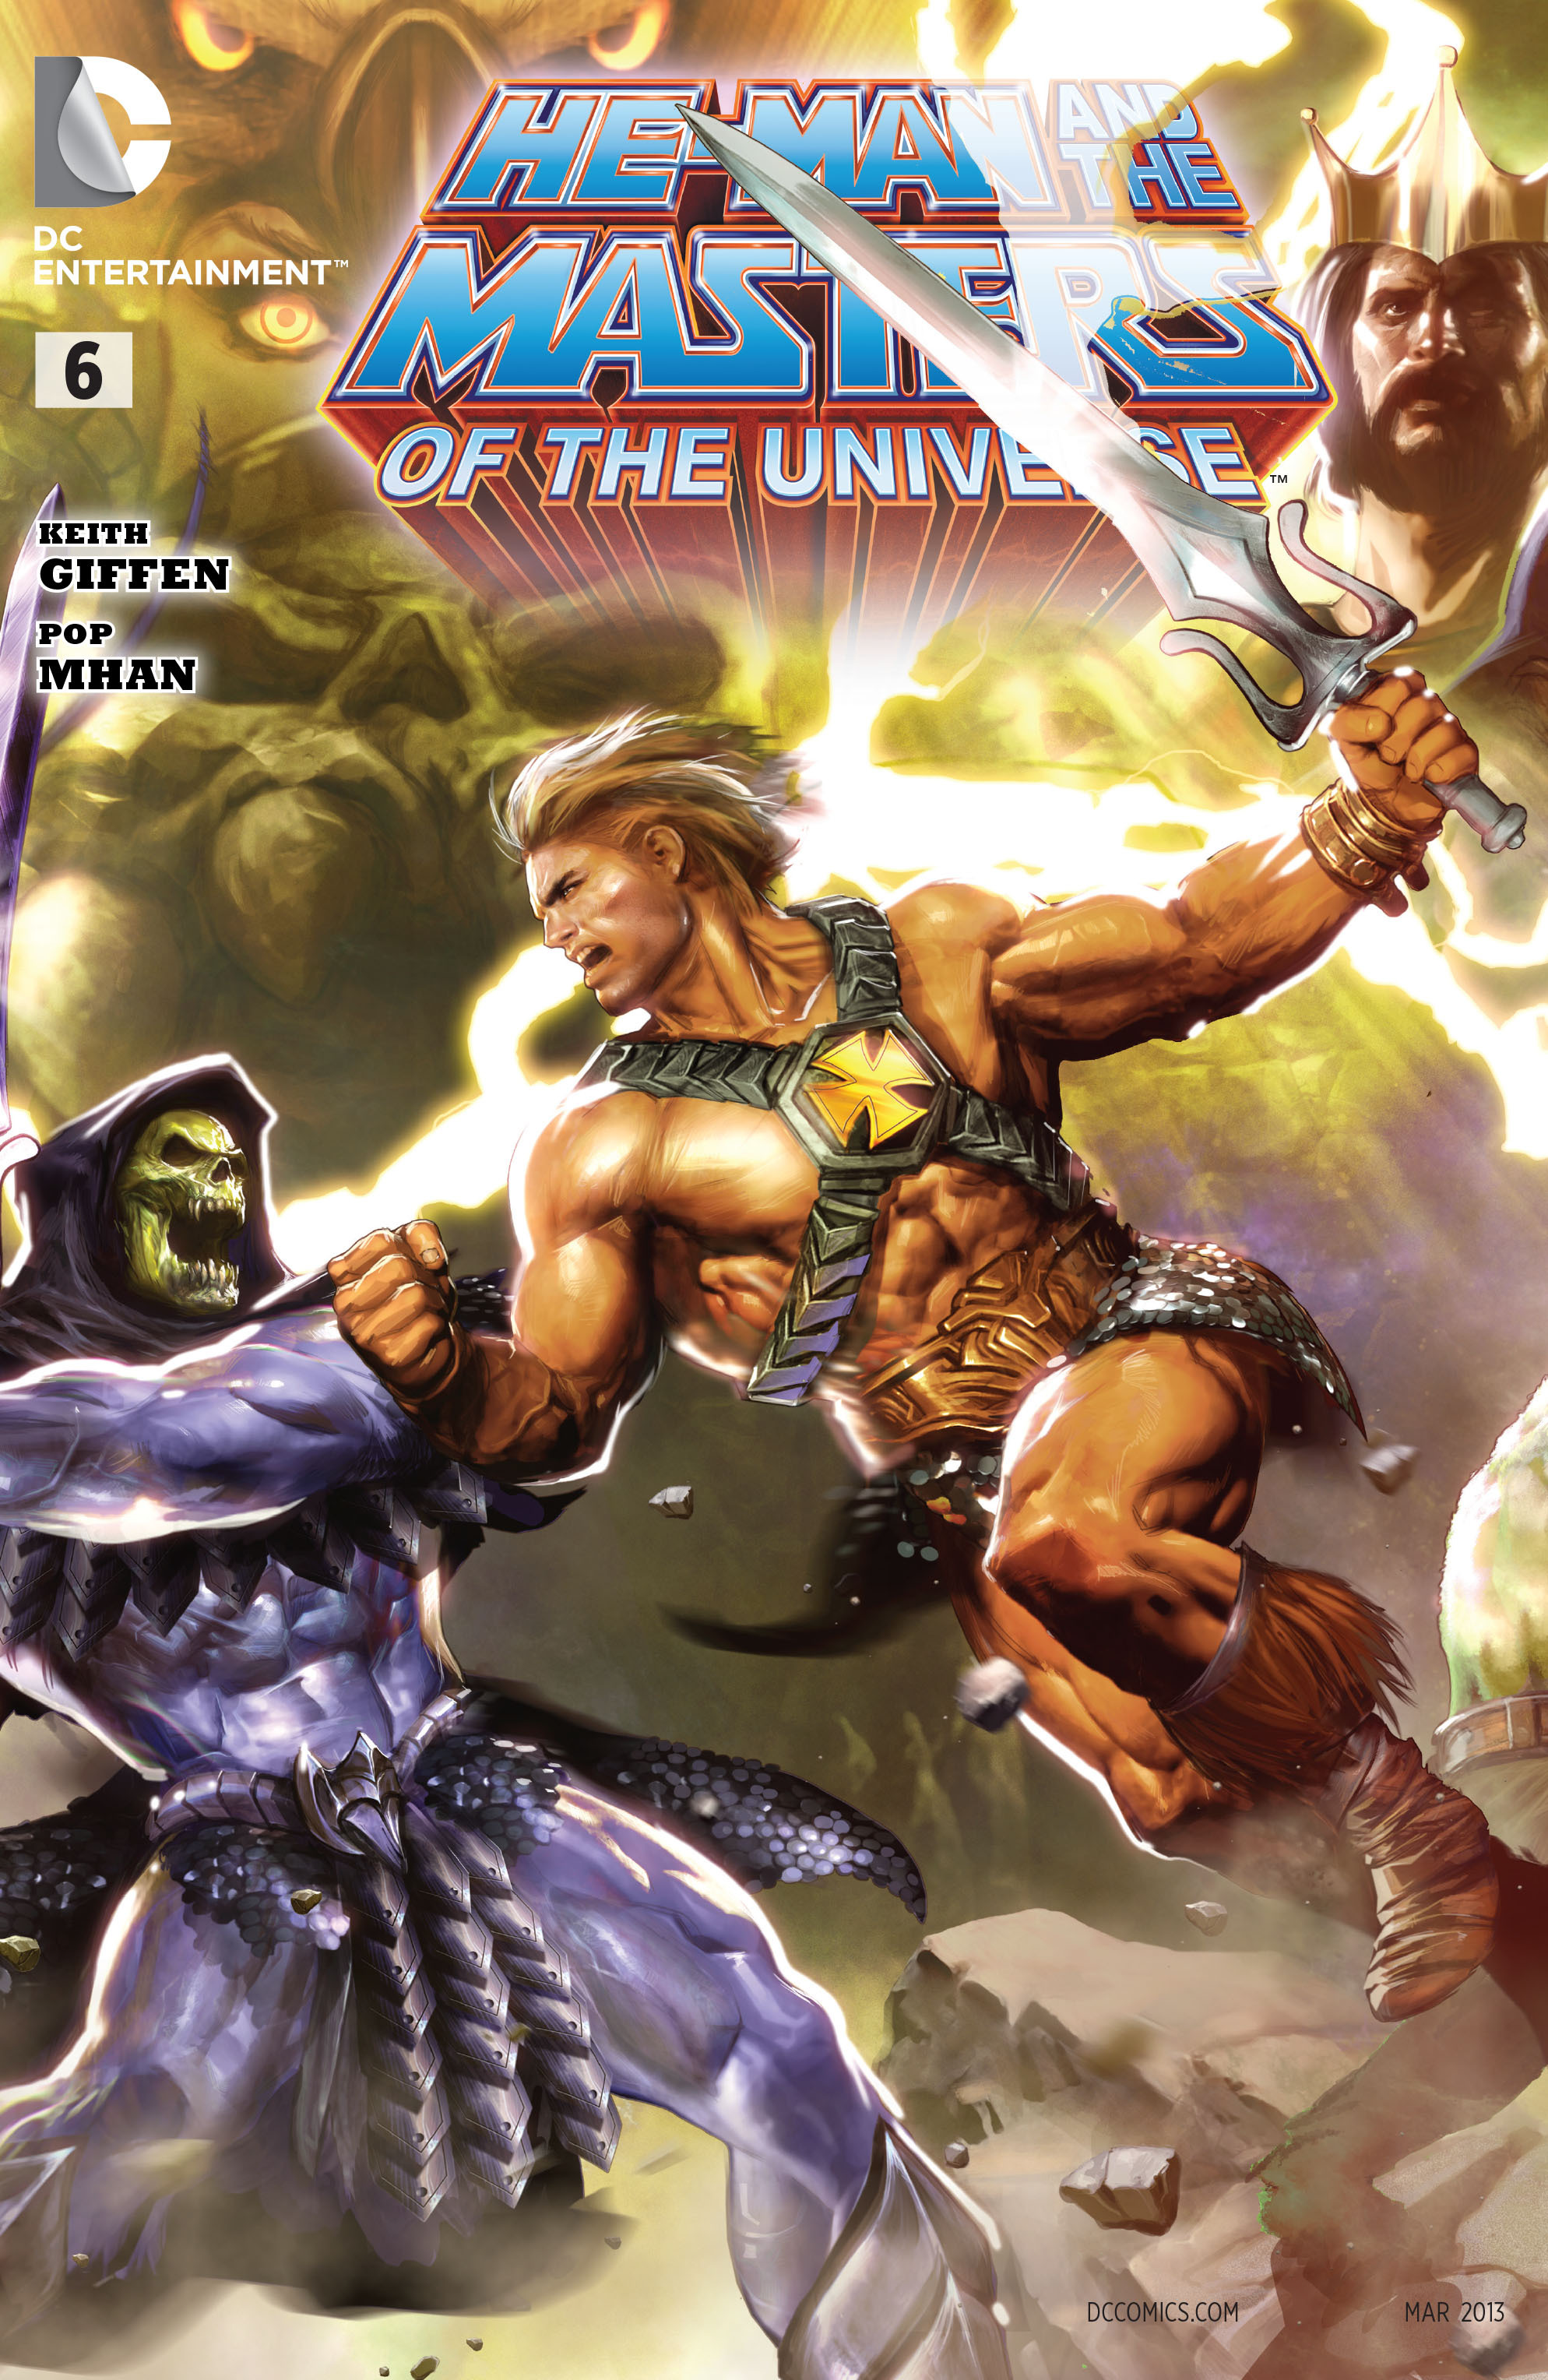 He-Man and the Masters of the Universe Vol 1 6 | DC Database | FANDOM